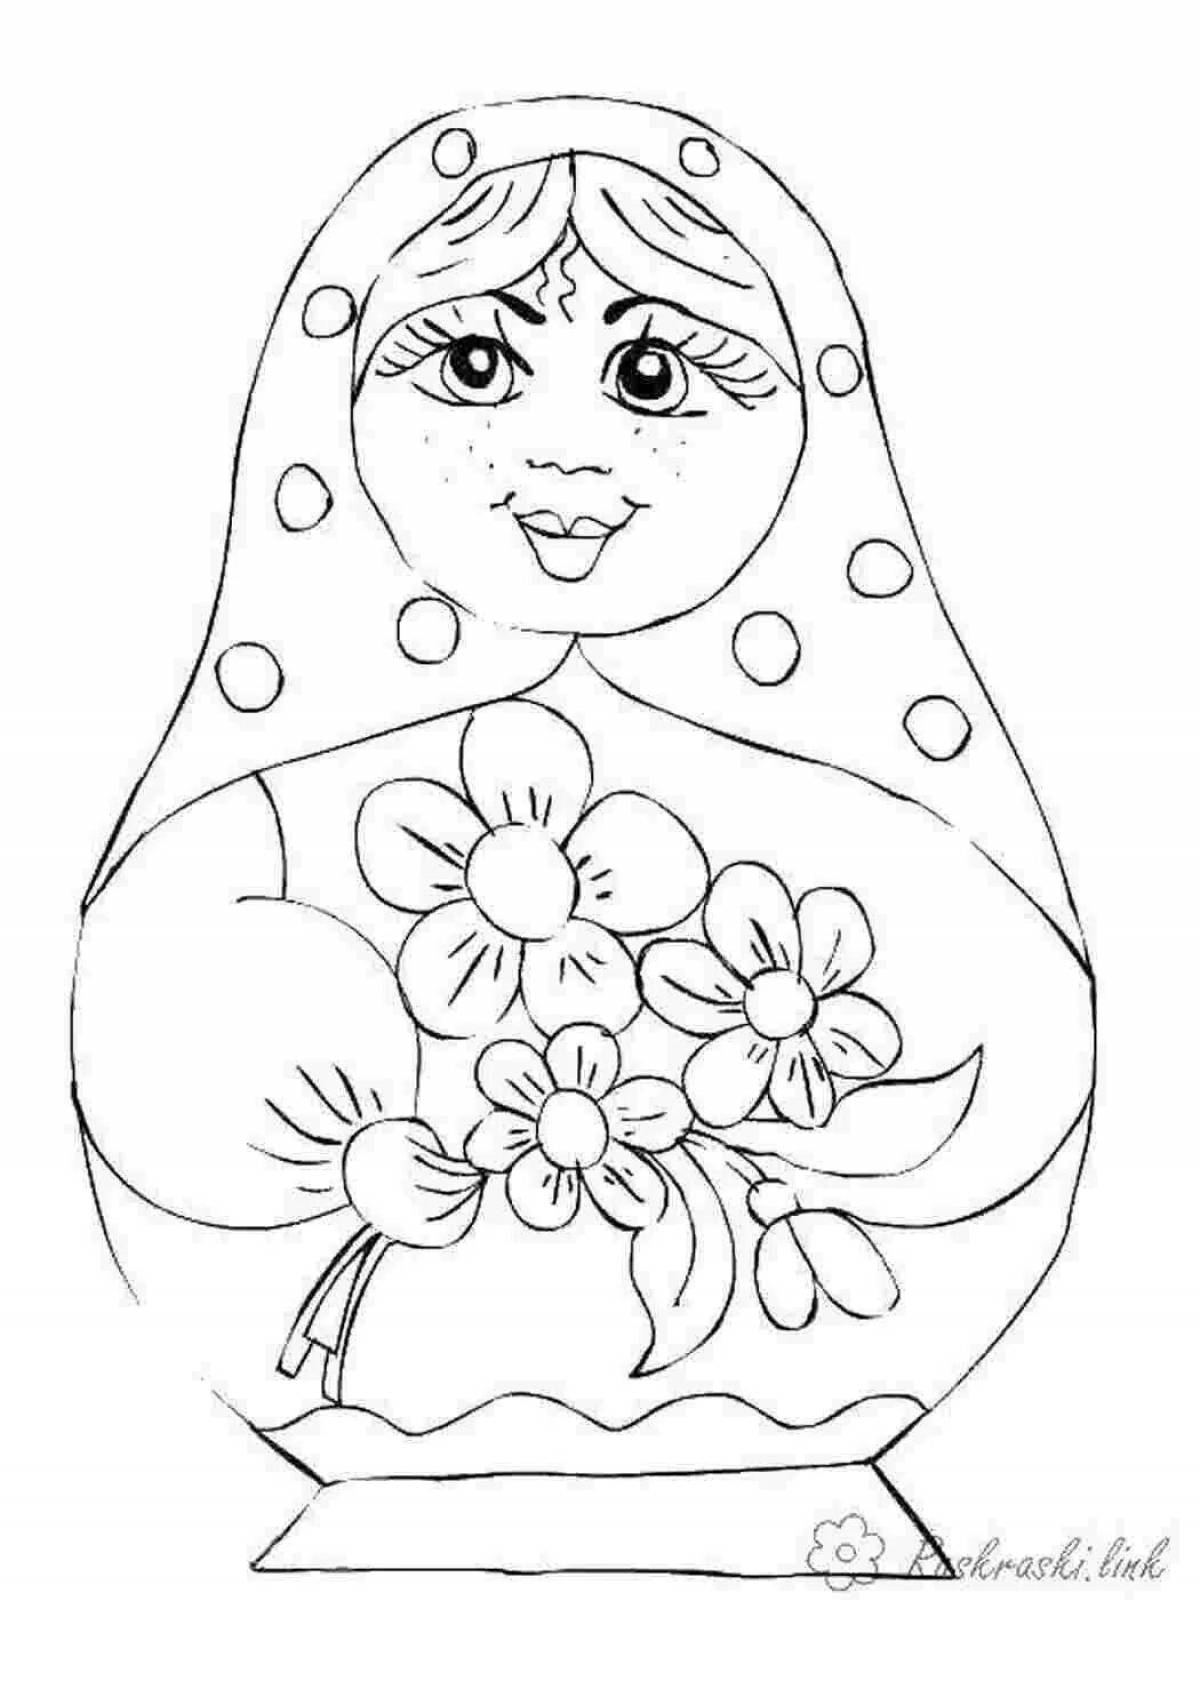 Inspirational matryoshka coloring pages for kids